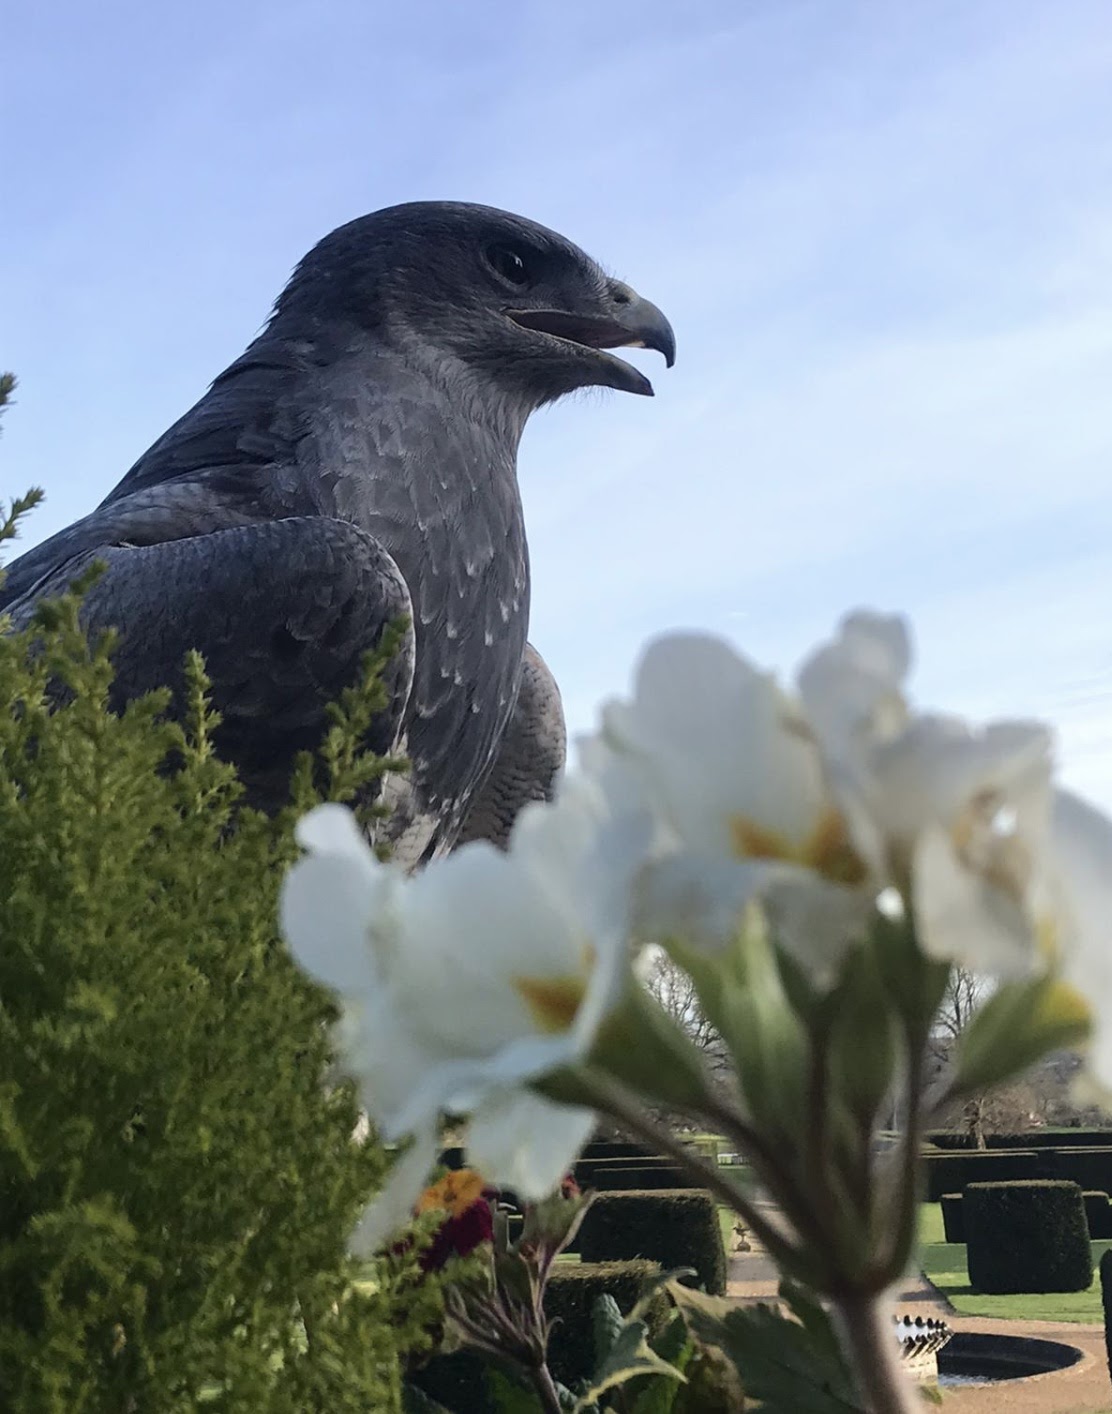 chilean blue eagle and flowers